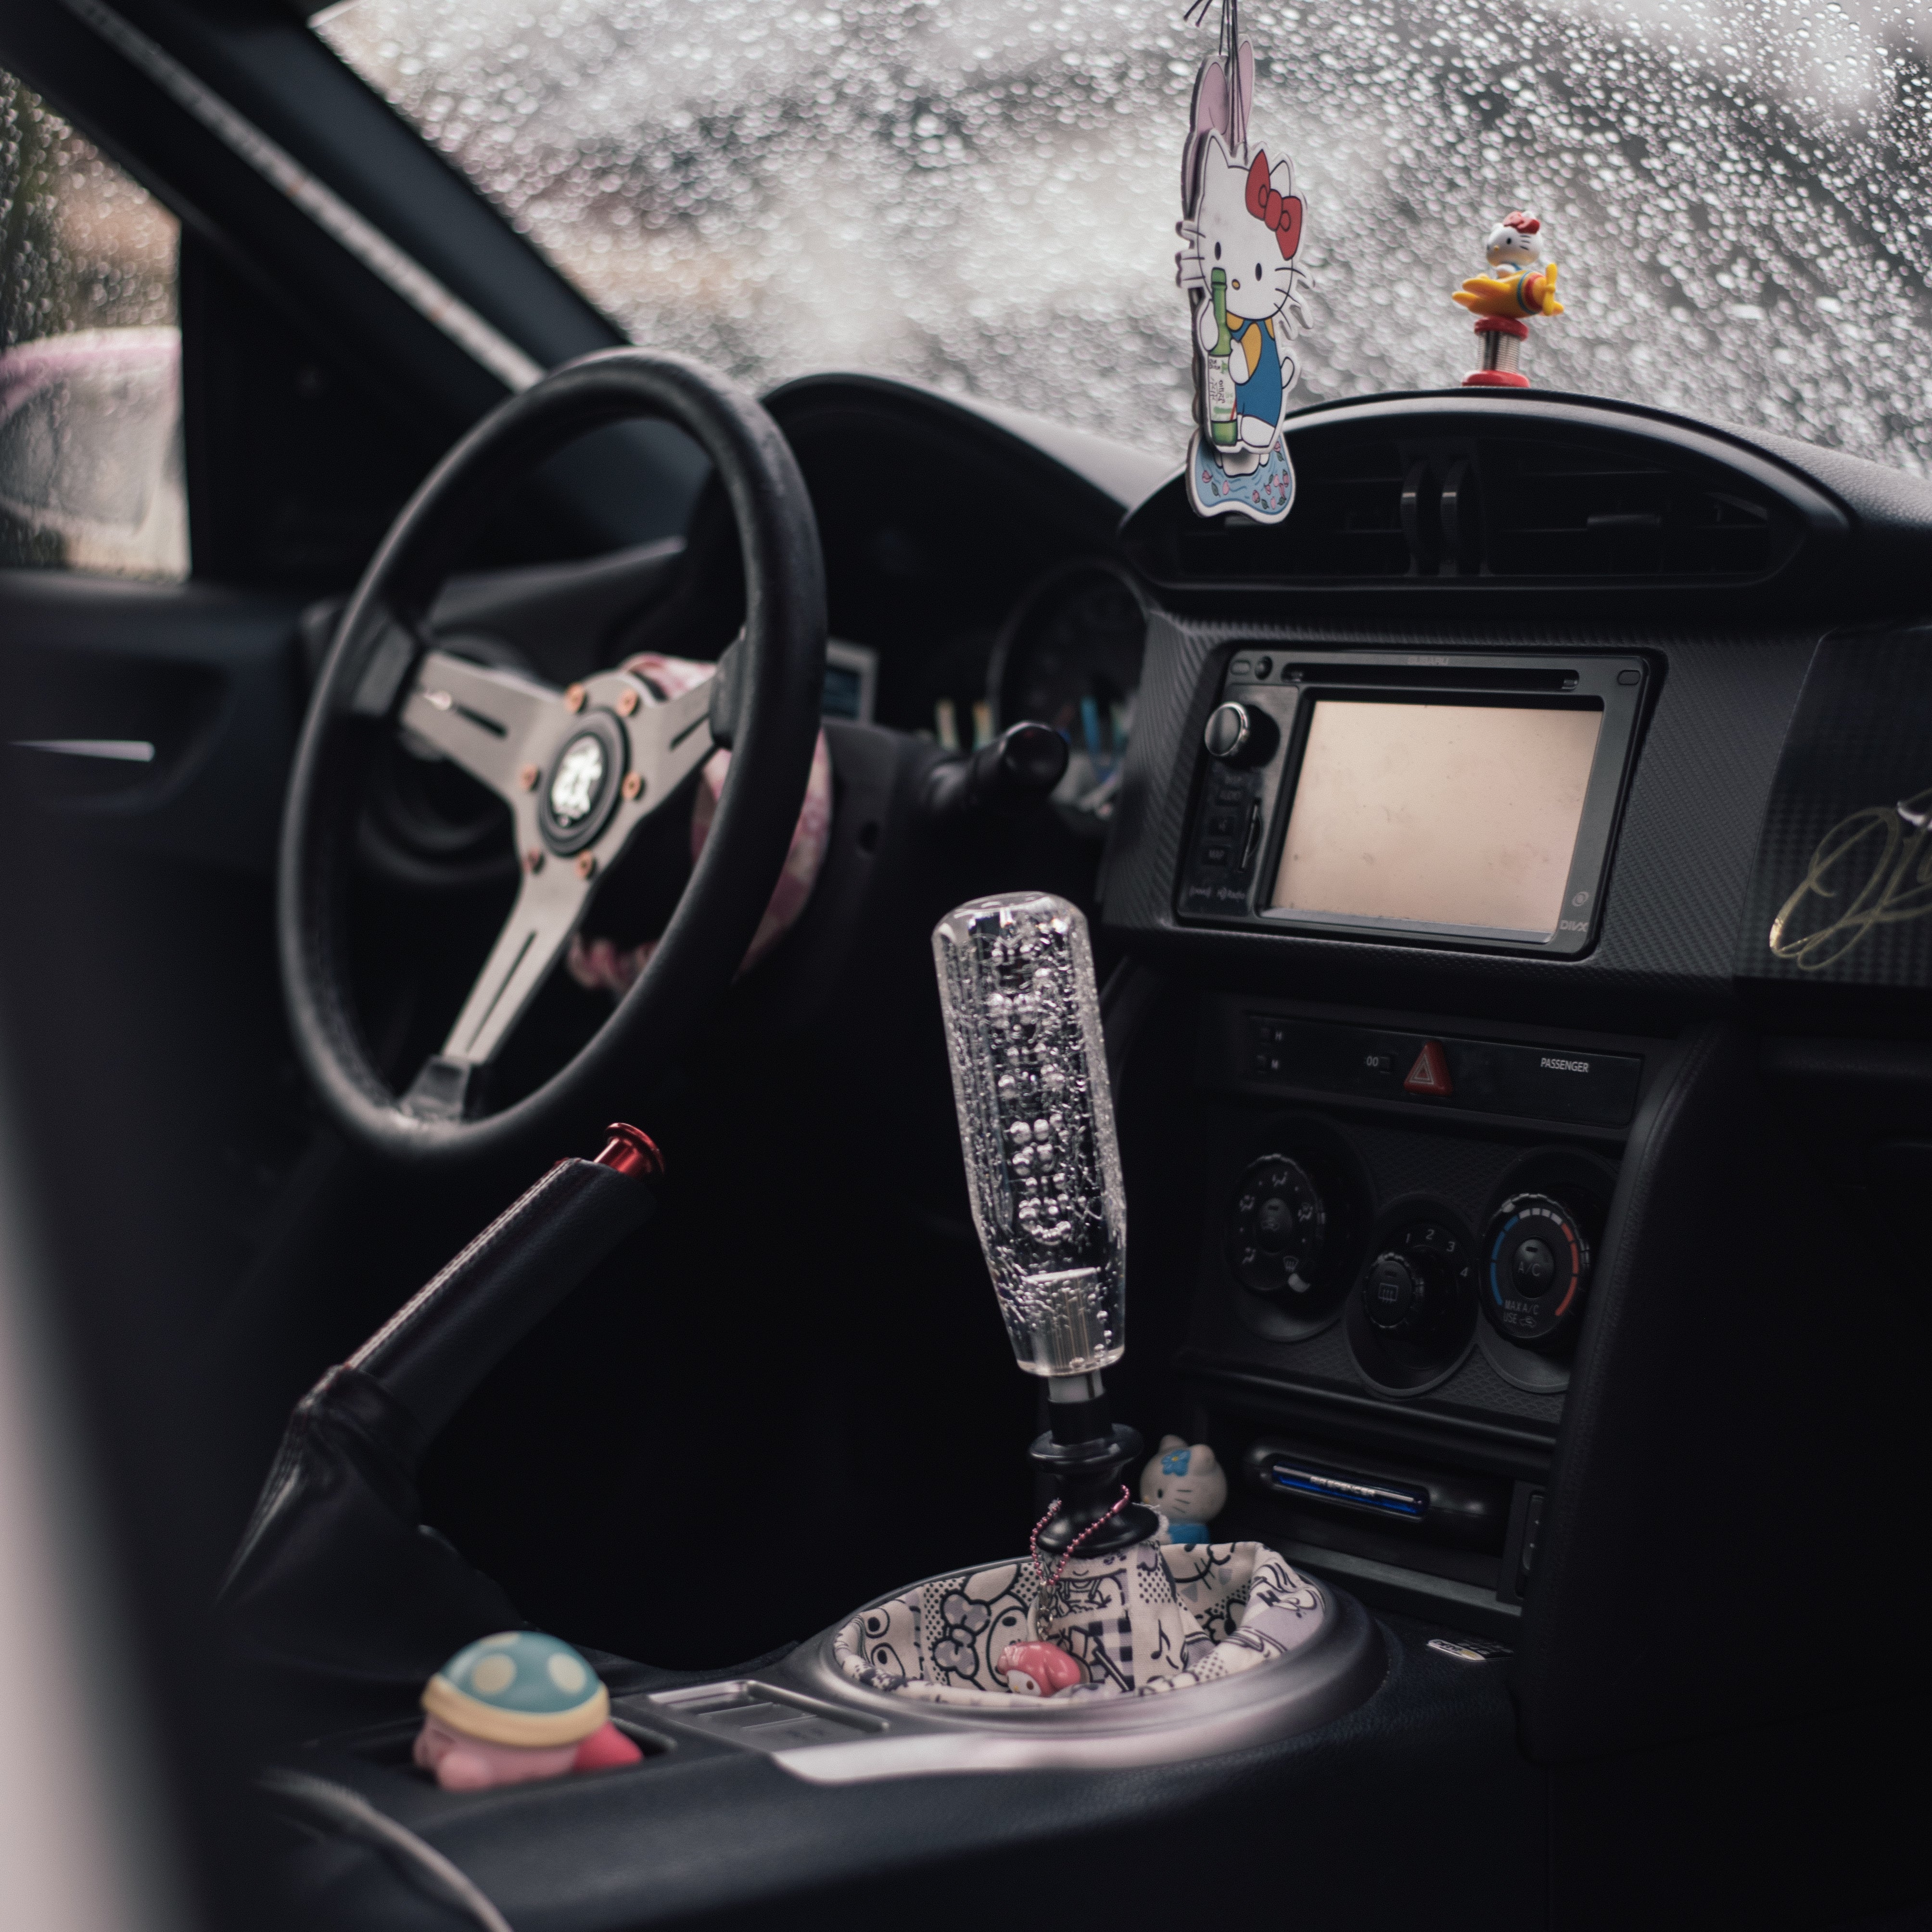 the interior of a subaru BRZ with a jdm bubble shift knob surrounded by lots of cute sanrio related car interior accessories